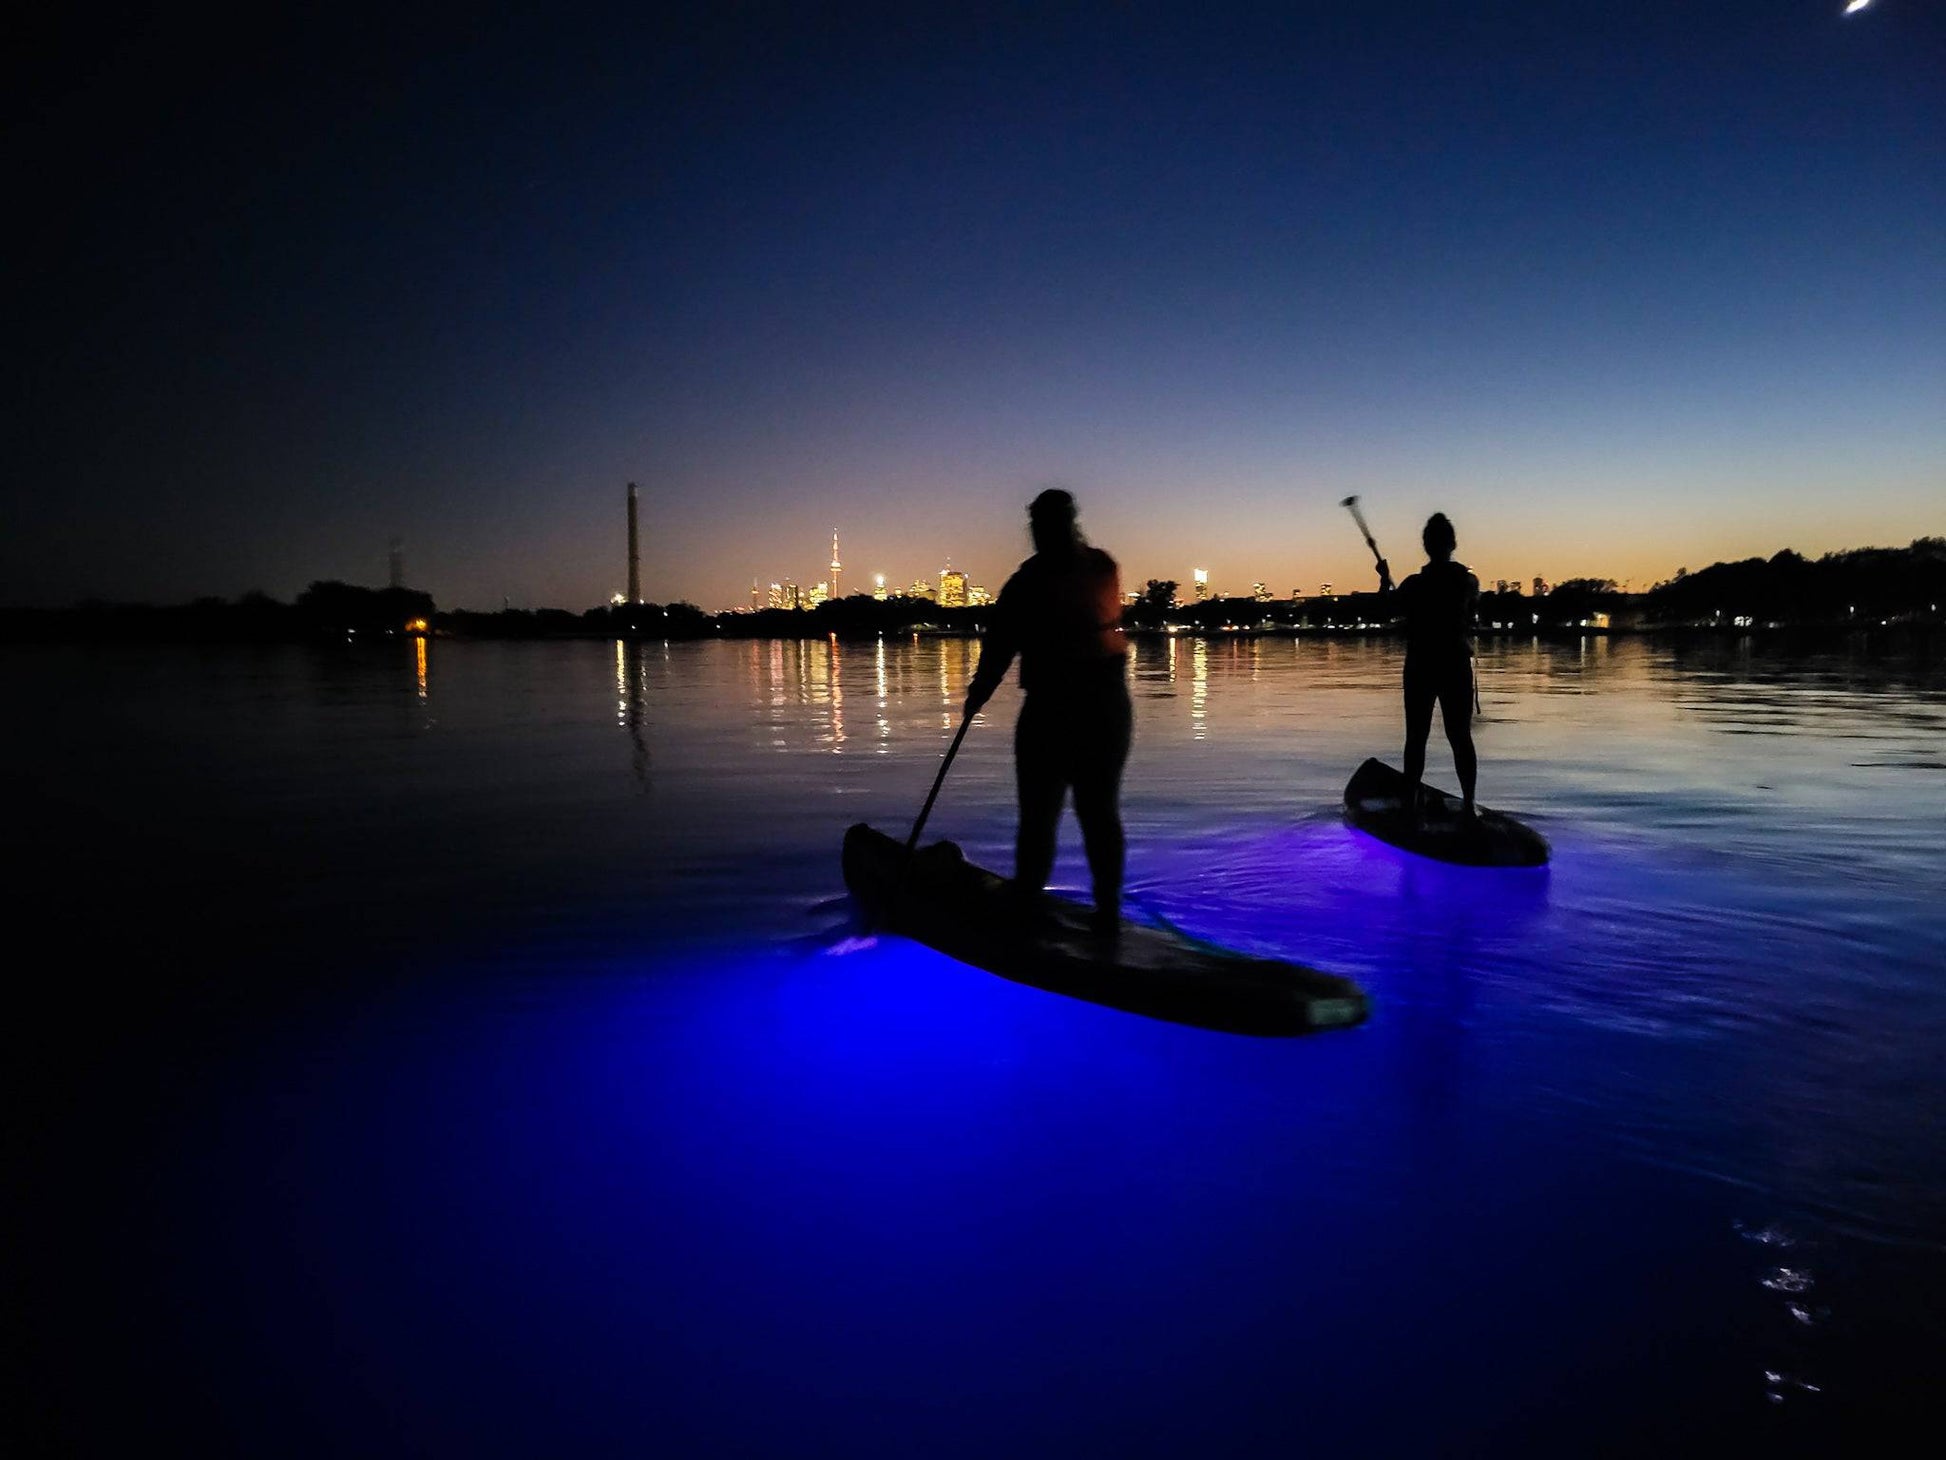 Friends enjoying the sunset while lighting up the water below their paddle boards